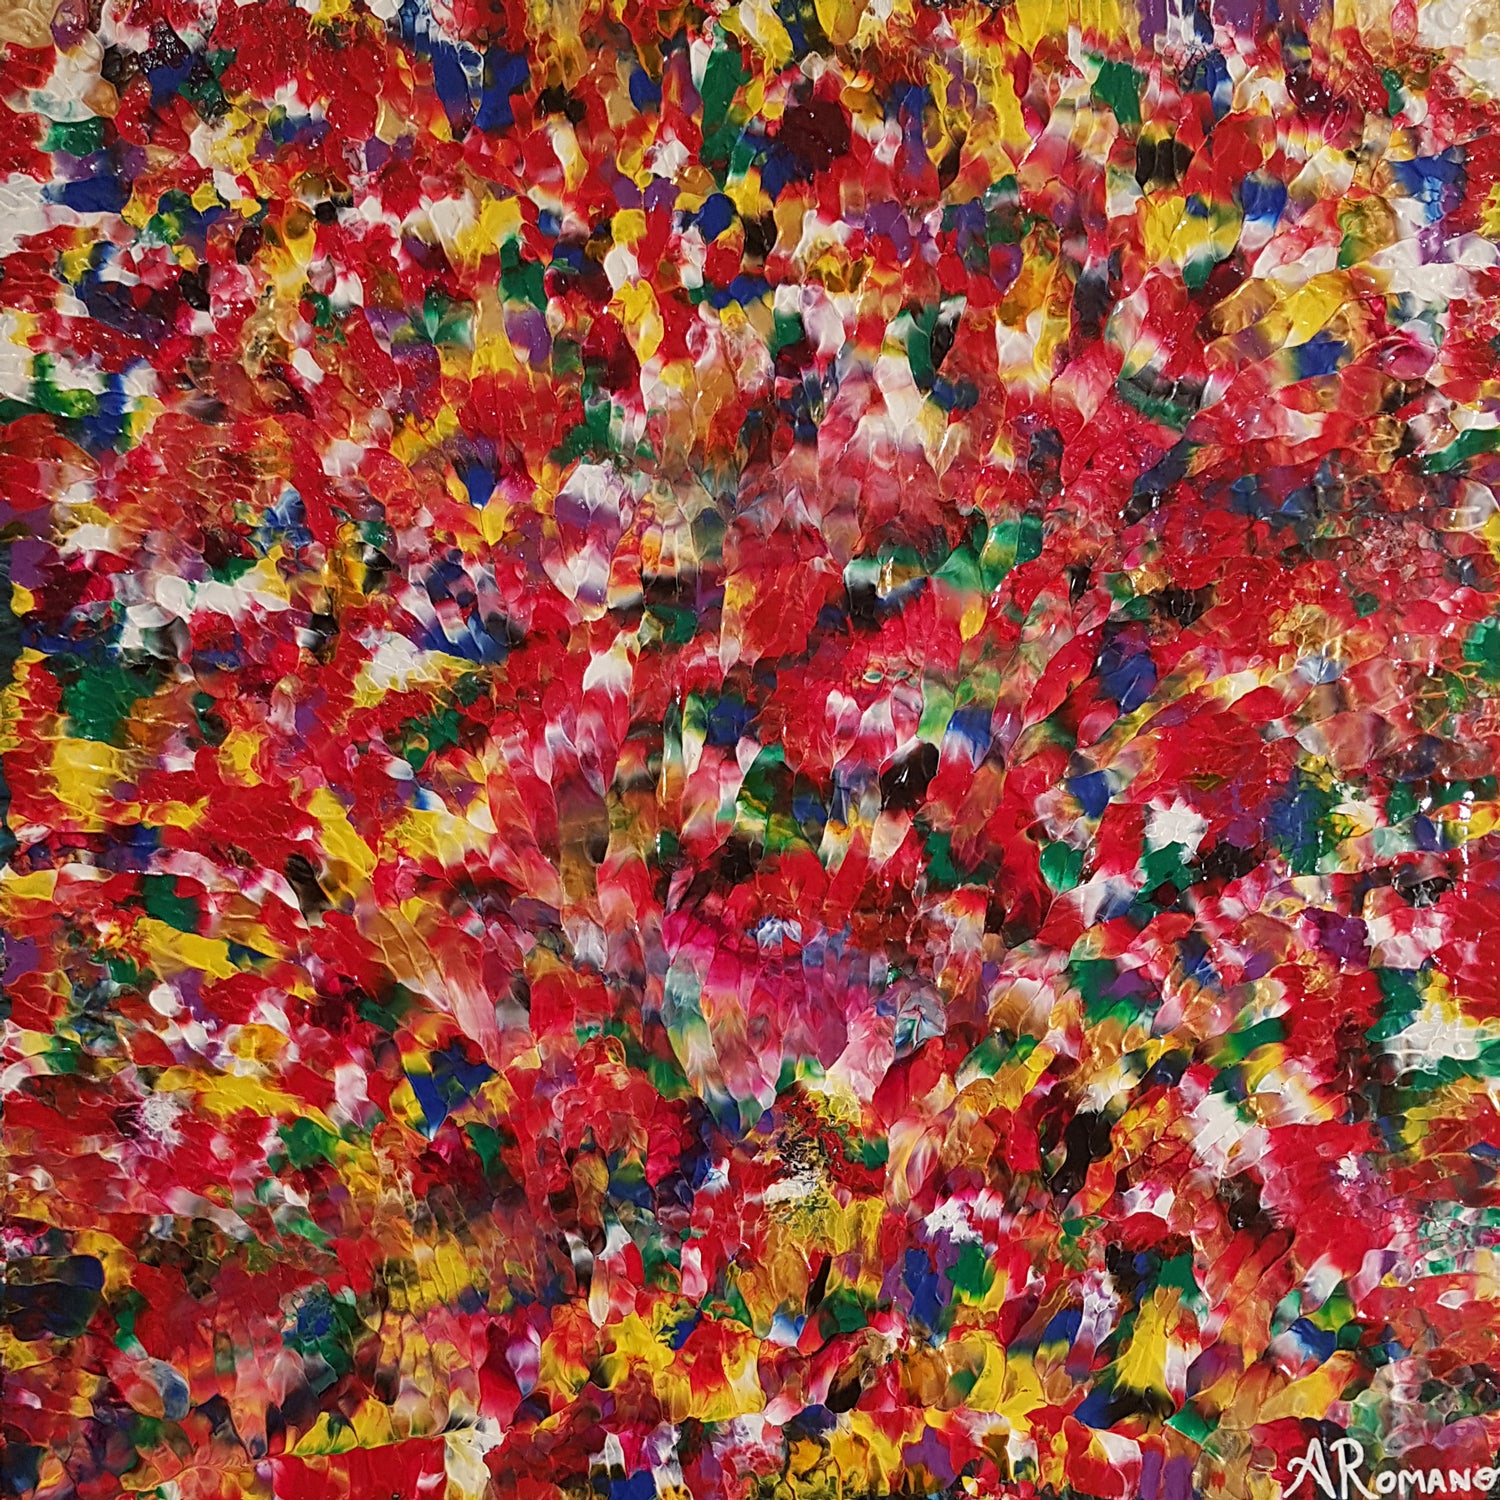 Phoenix-Rose-Original-Abstract-Expressionism-Painting-Red-Yellow-Vibrant-Colourful-Artwork-Toronto-Canada